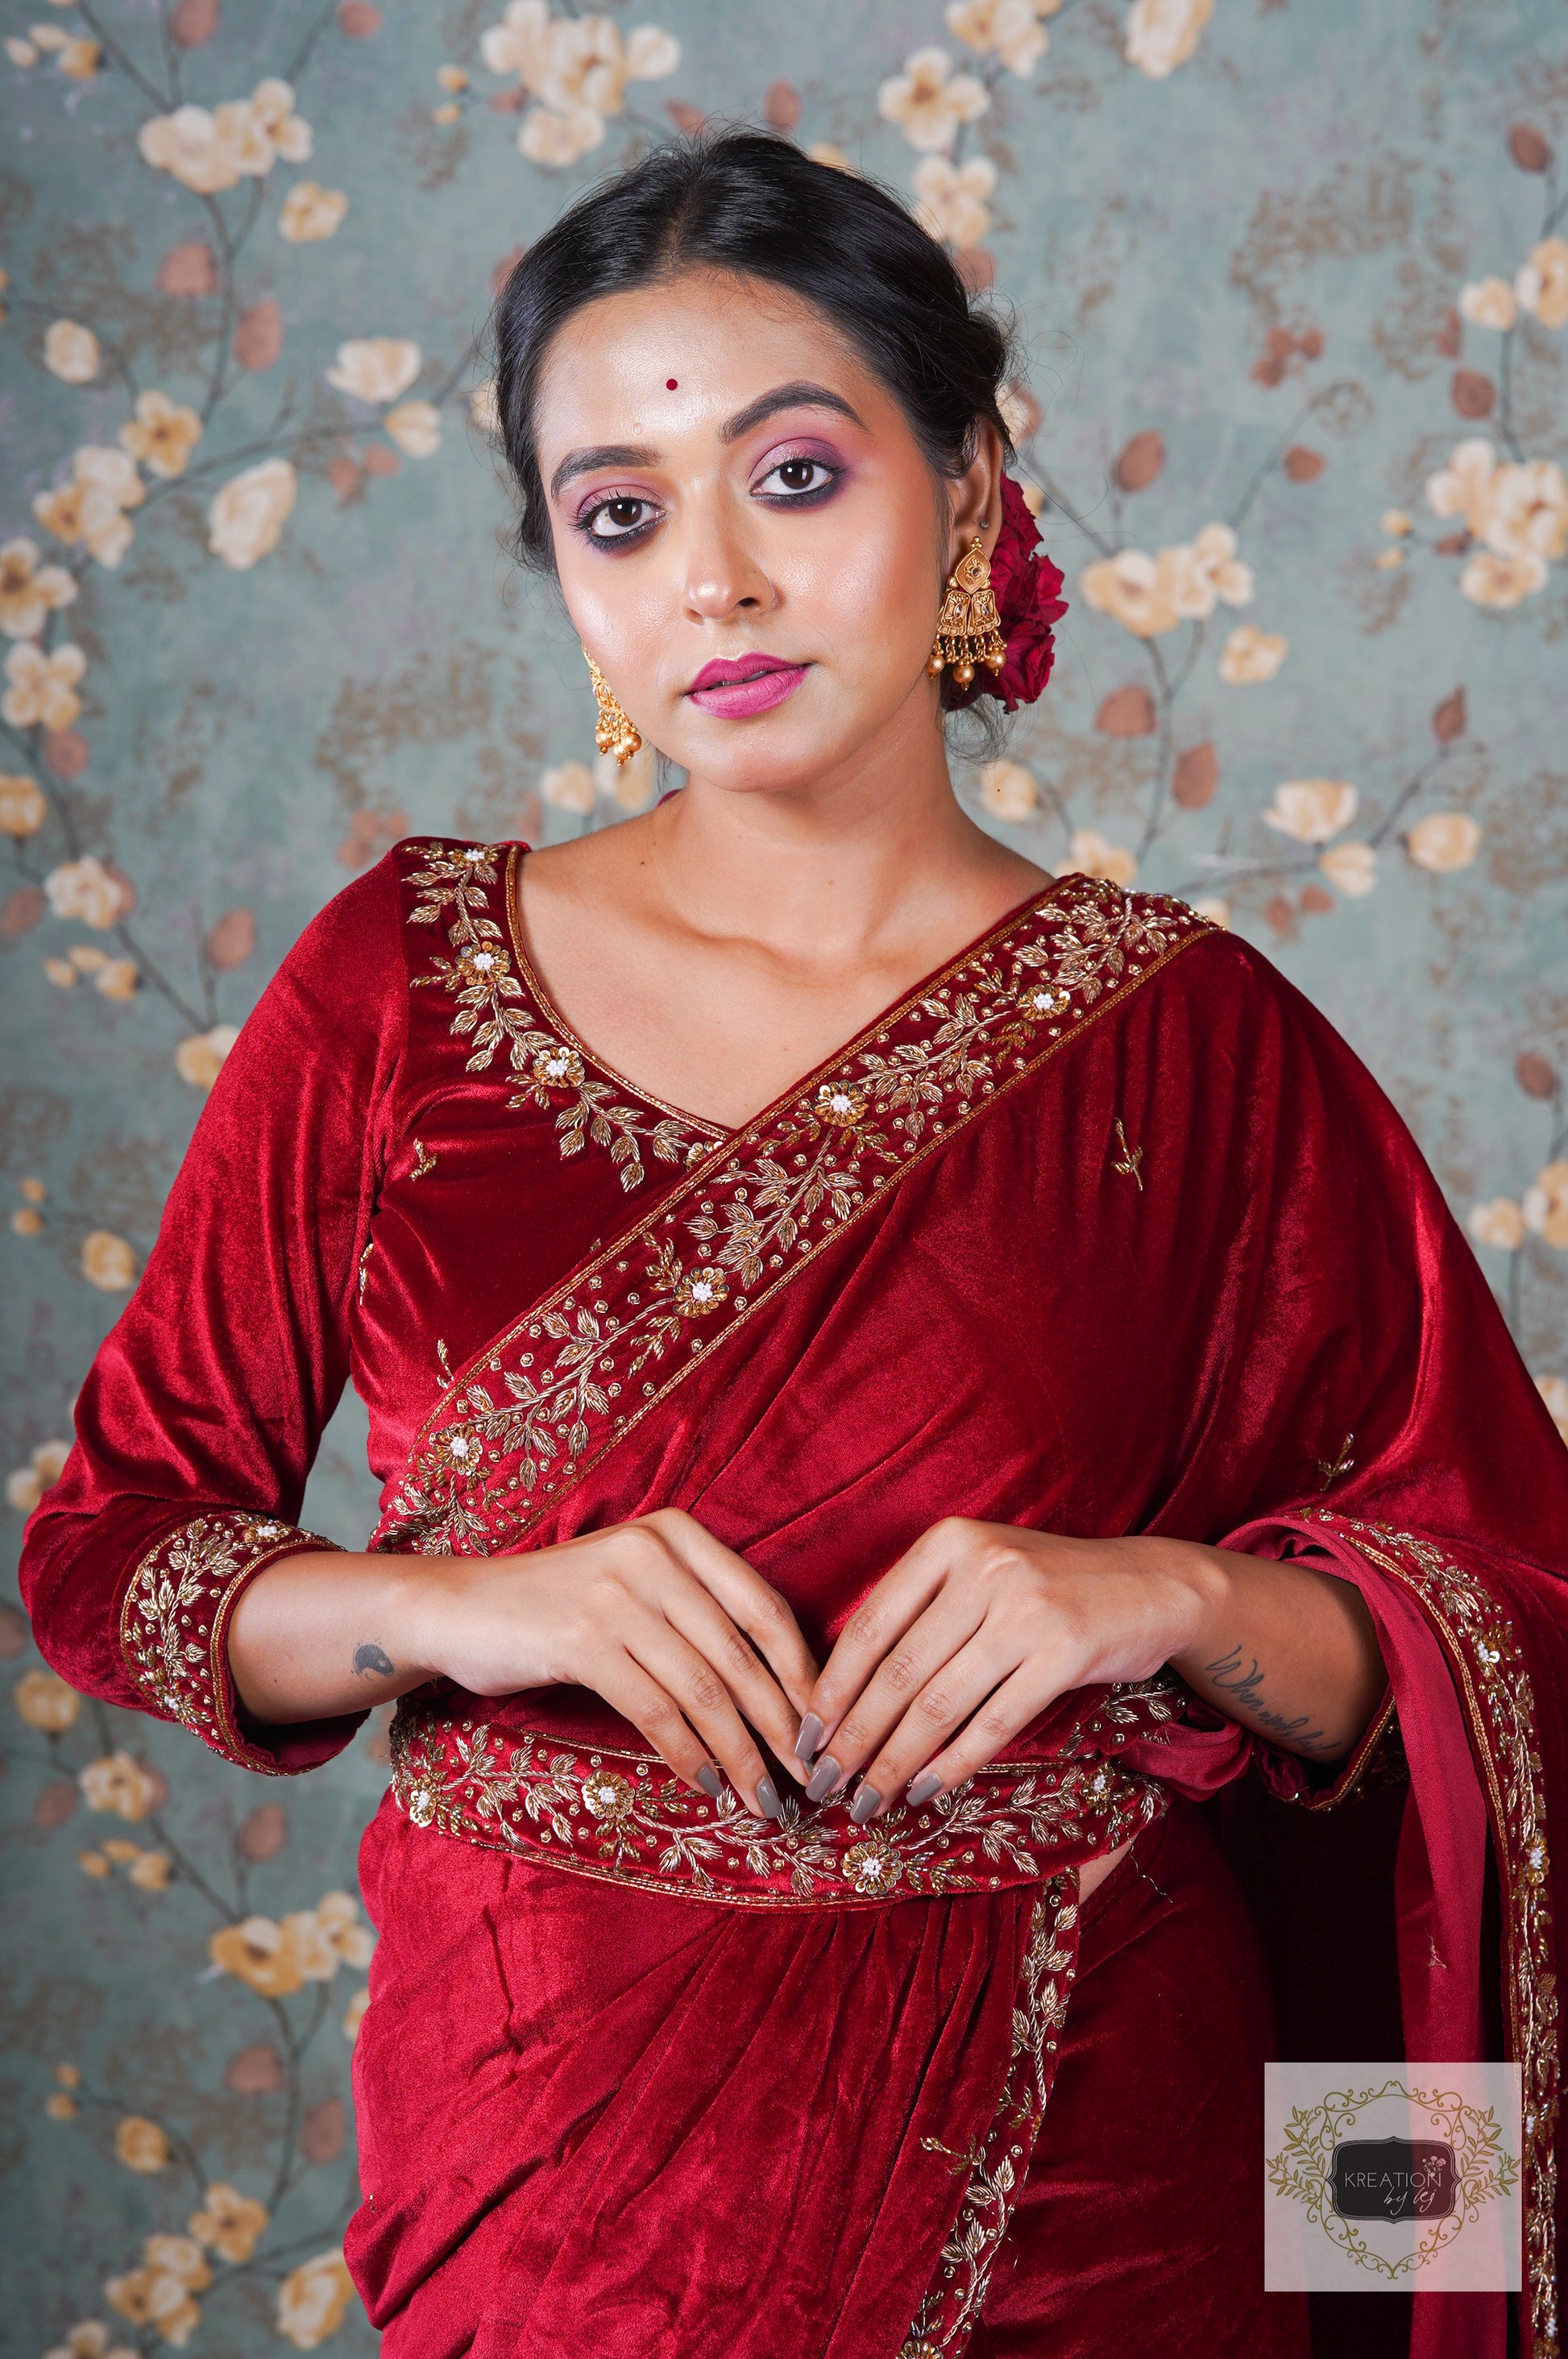 Add A Royal Touch To Your Sarees With Velvet Blouses!